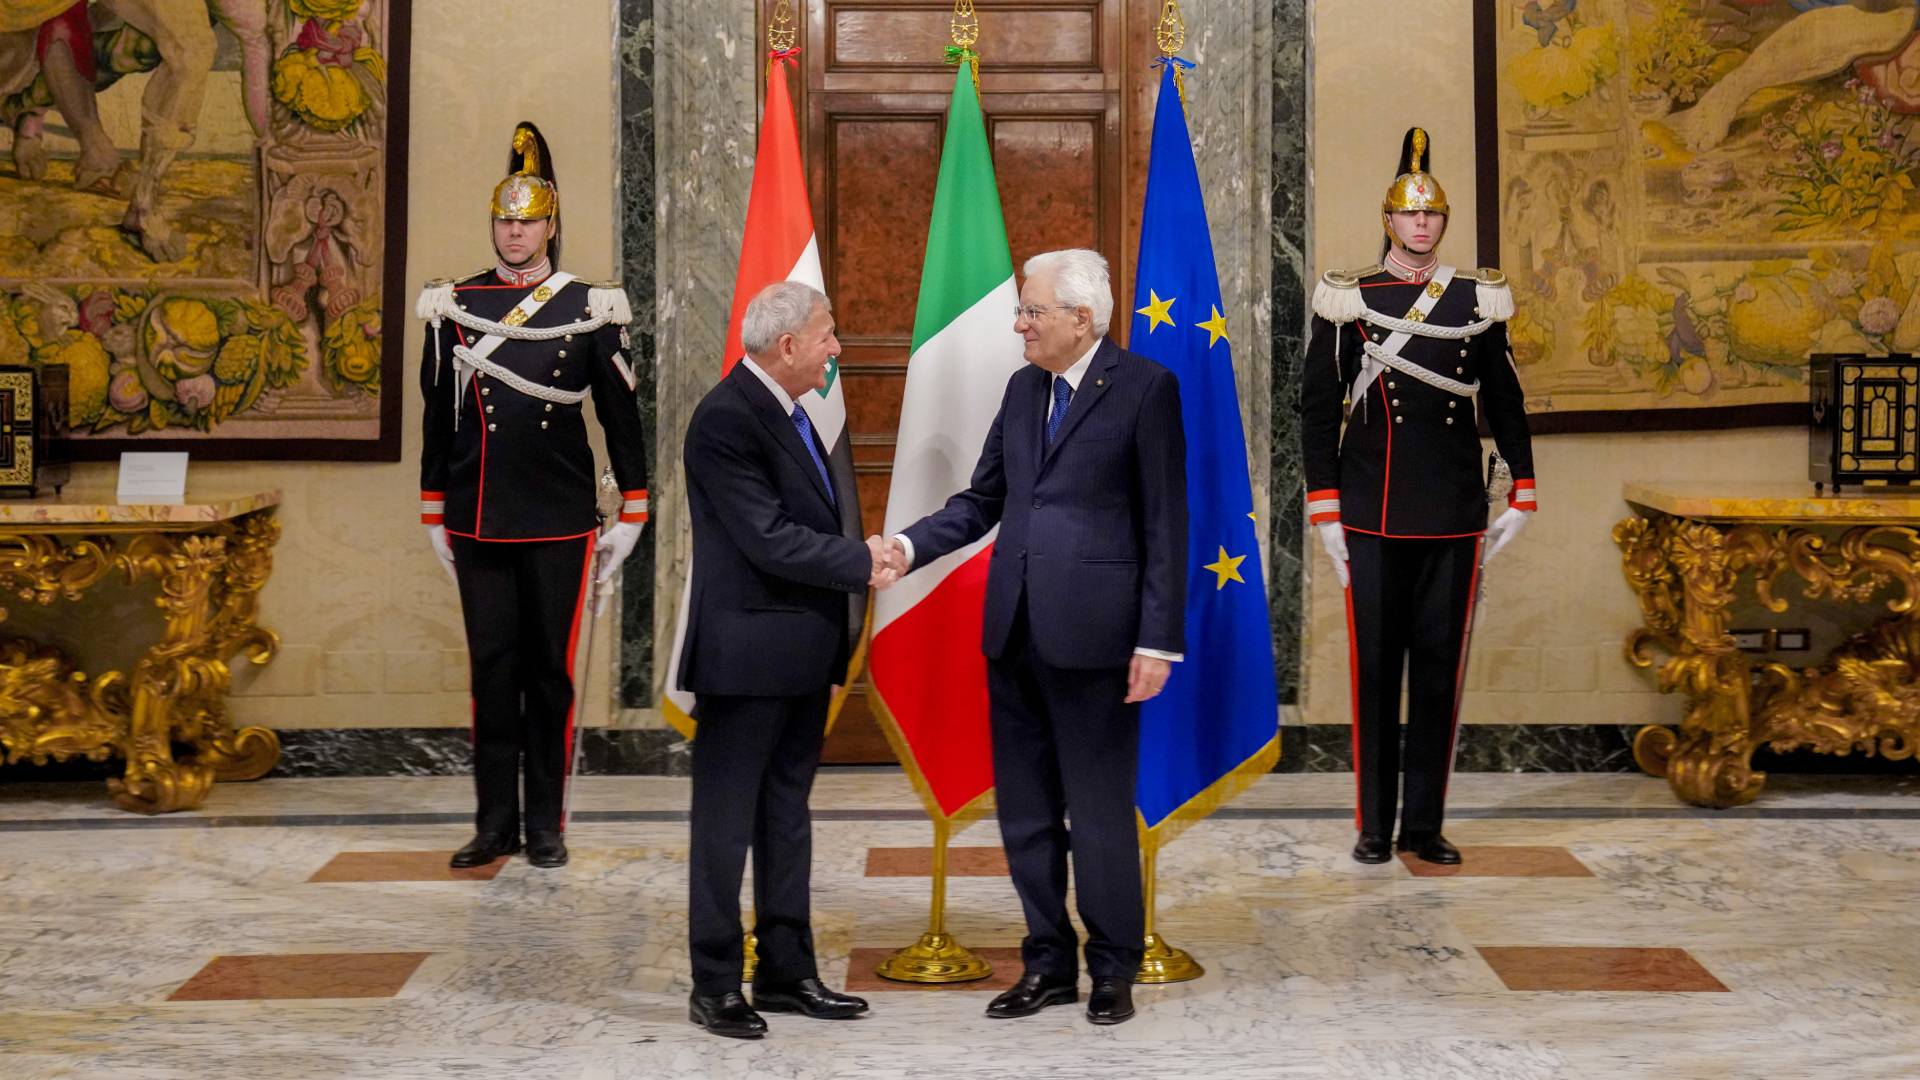 Presidents of Iraq and Italy meet in Rome